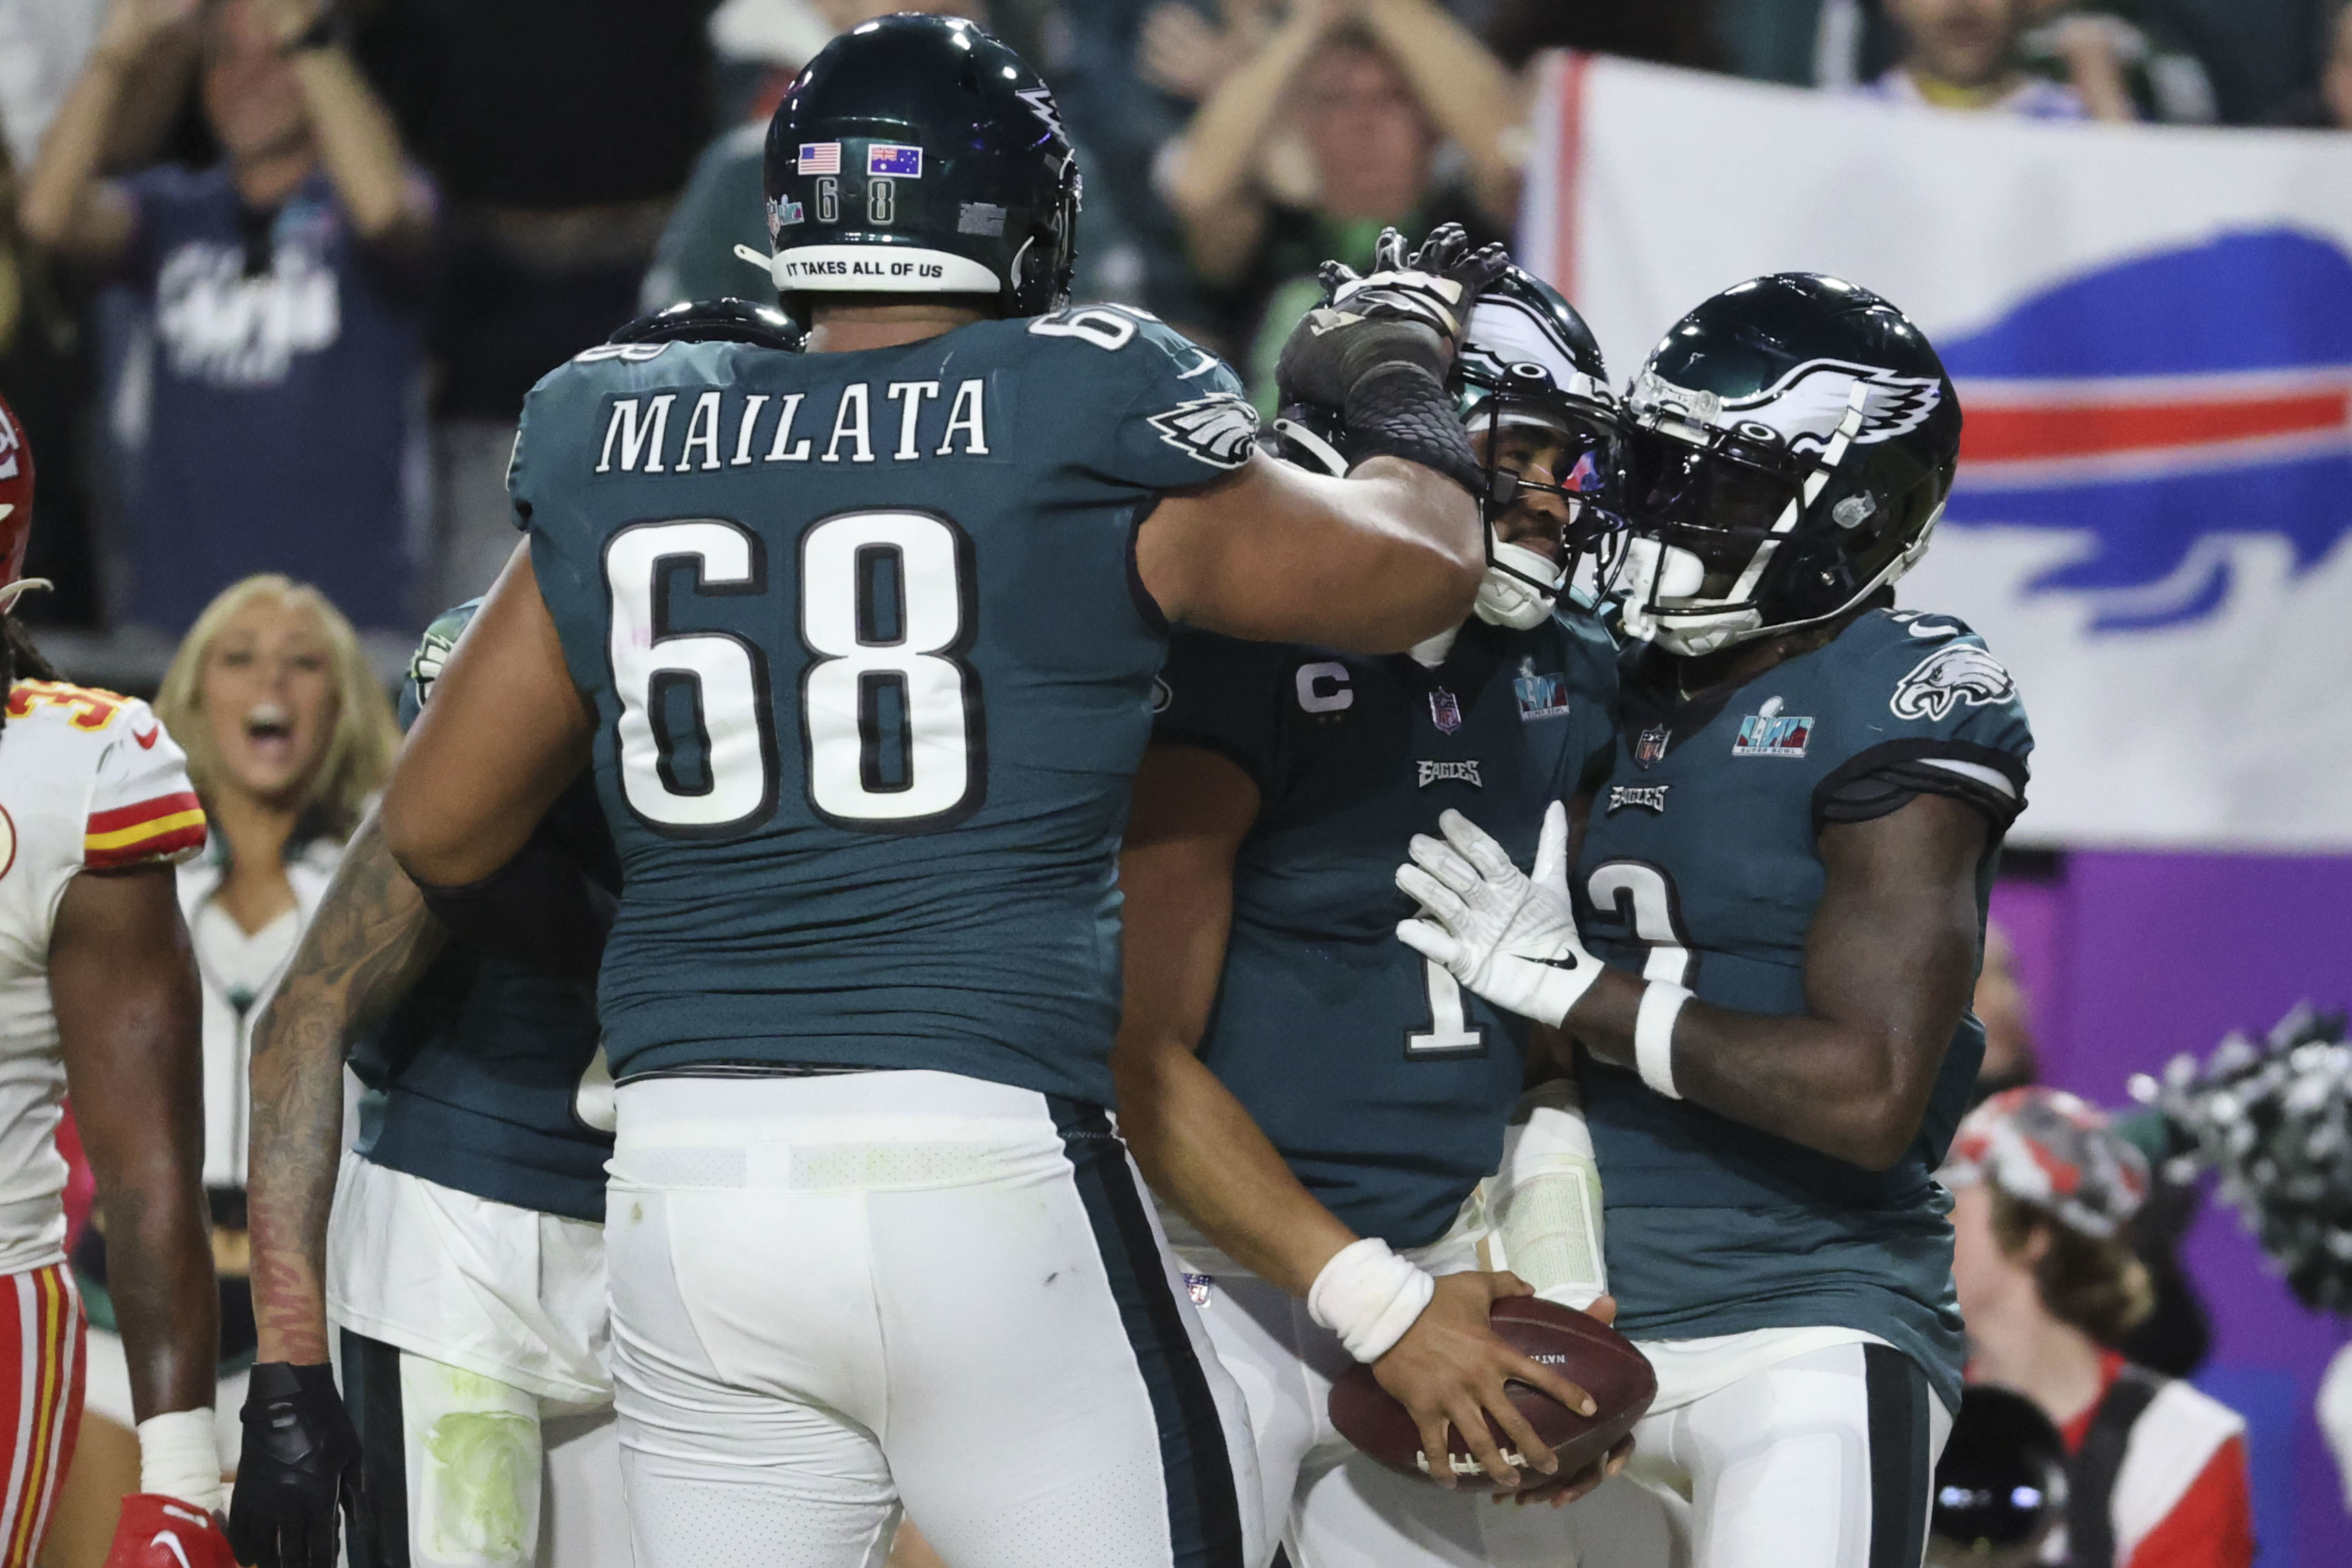 In an all-time great Super Bowl, the Eagles weren't good enough